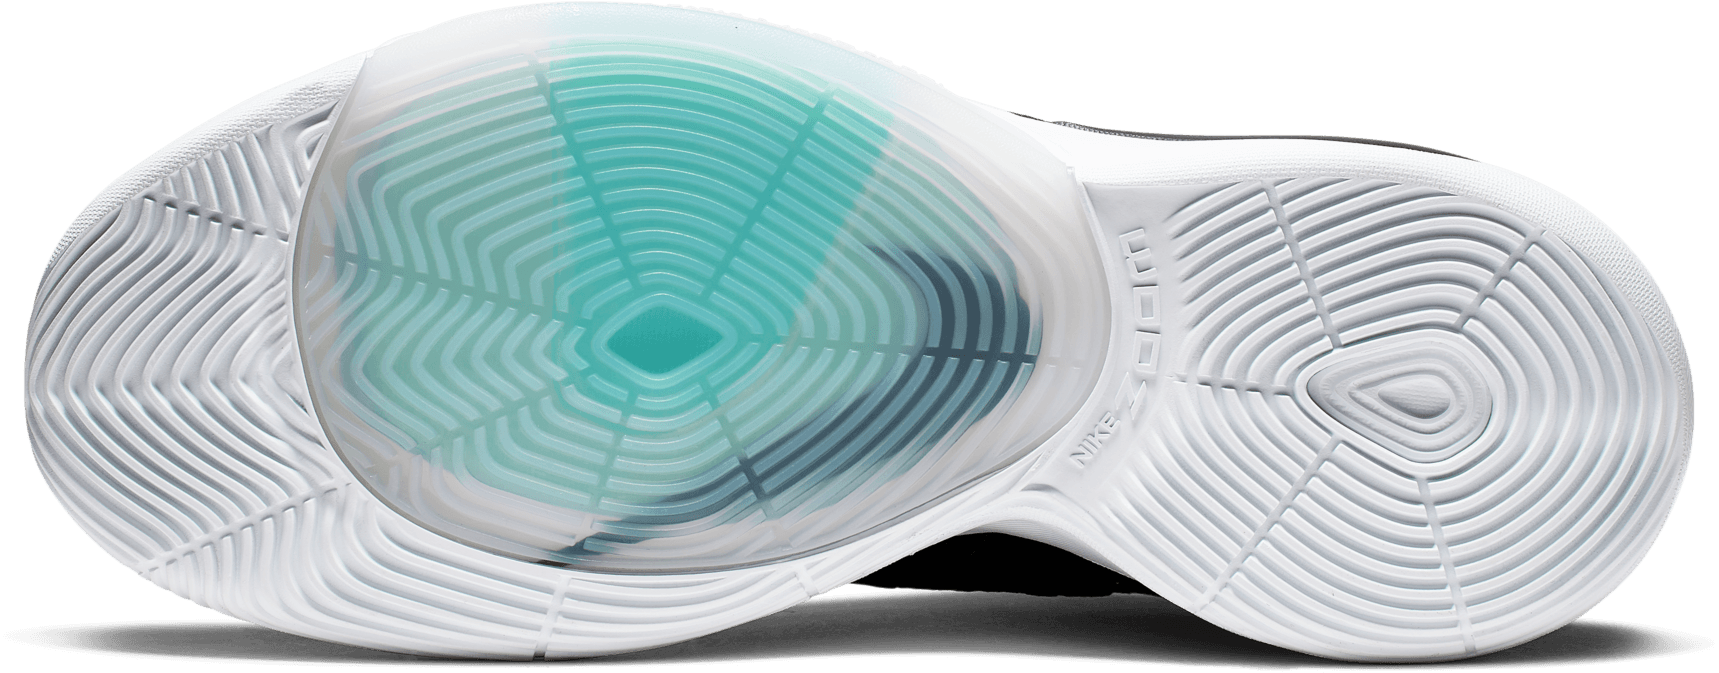 nike rize review